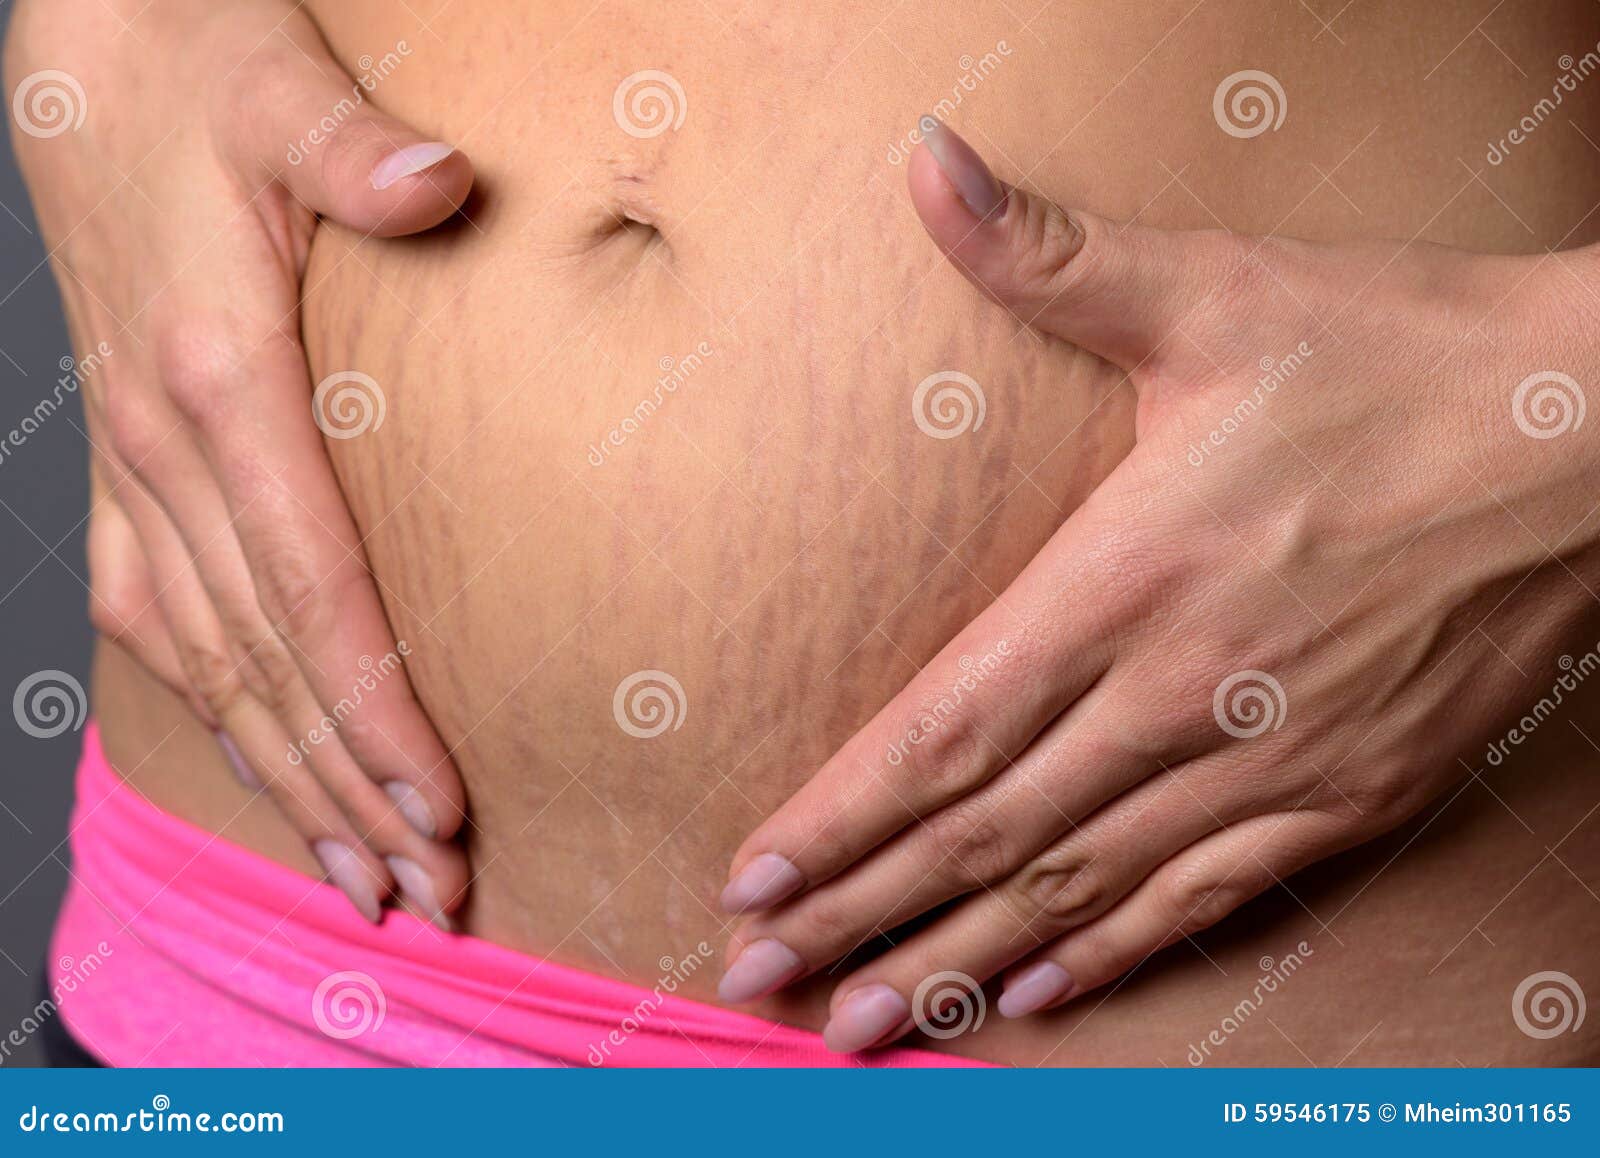 woman showing stretch marks on her lower abdomen